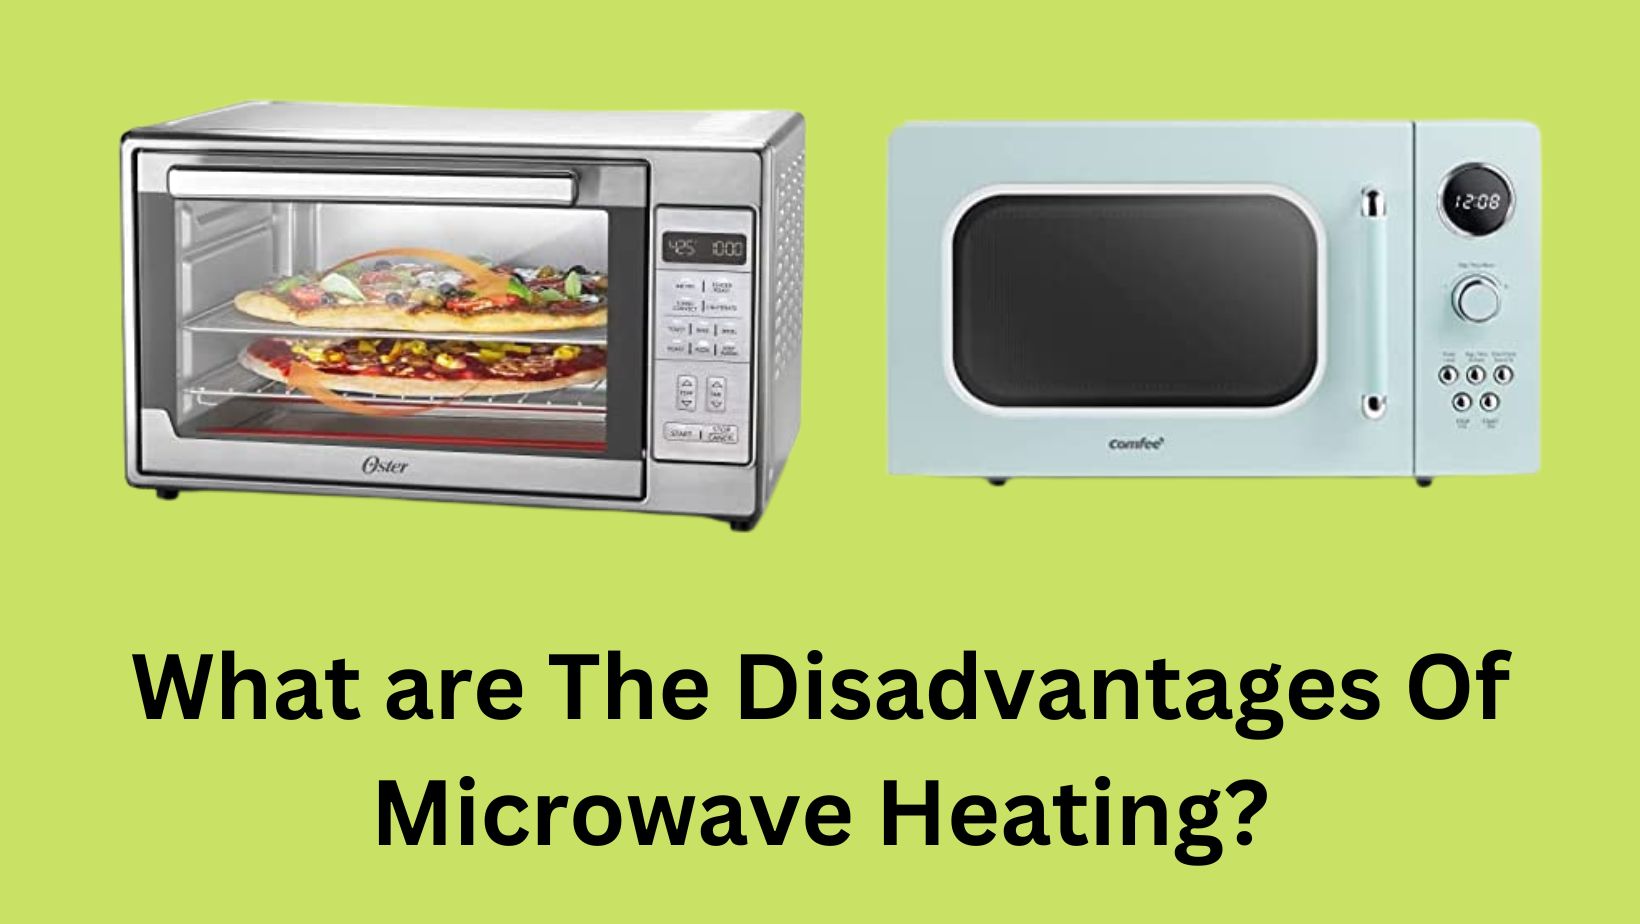 What are The Disadvantages Of Microwave Heating?